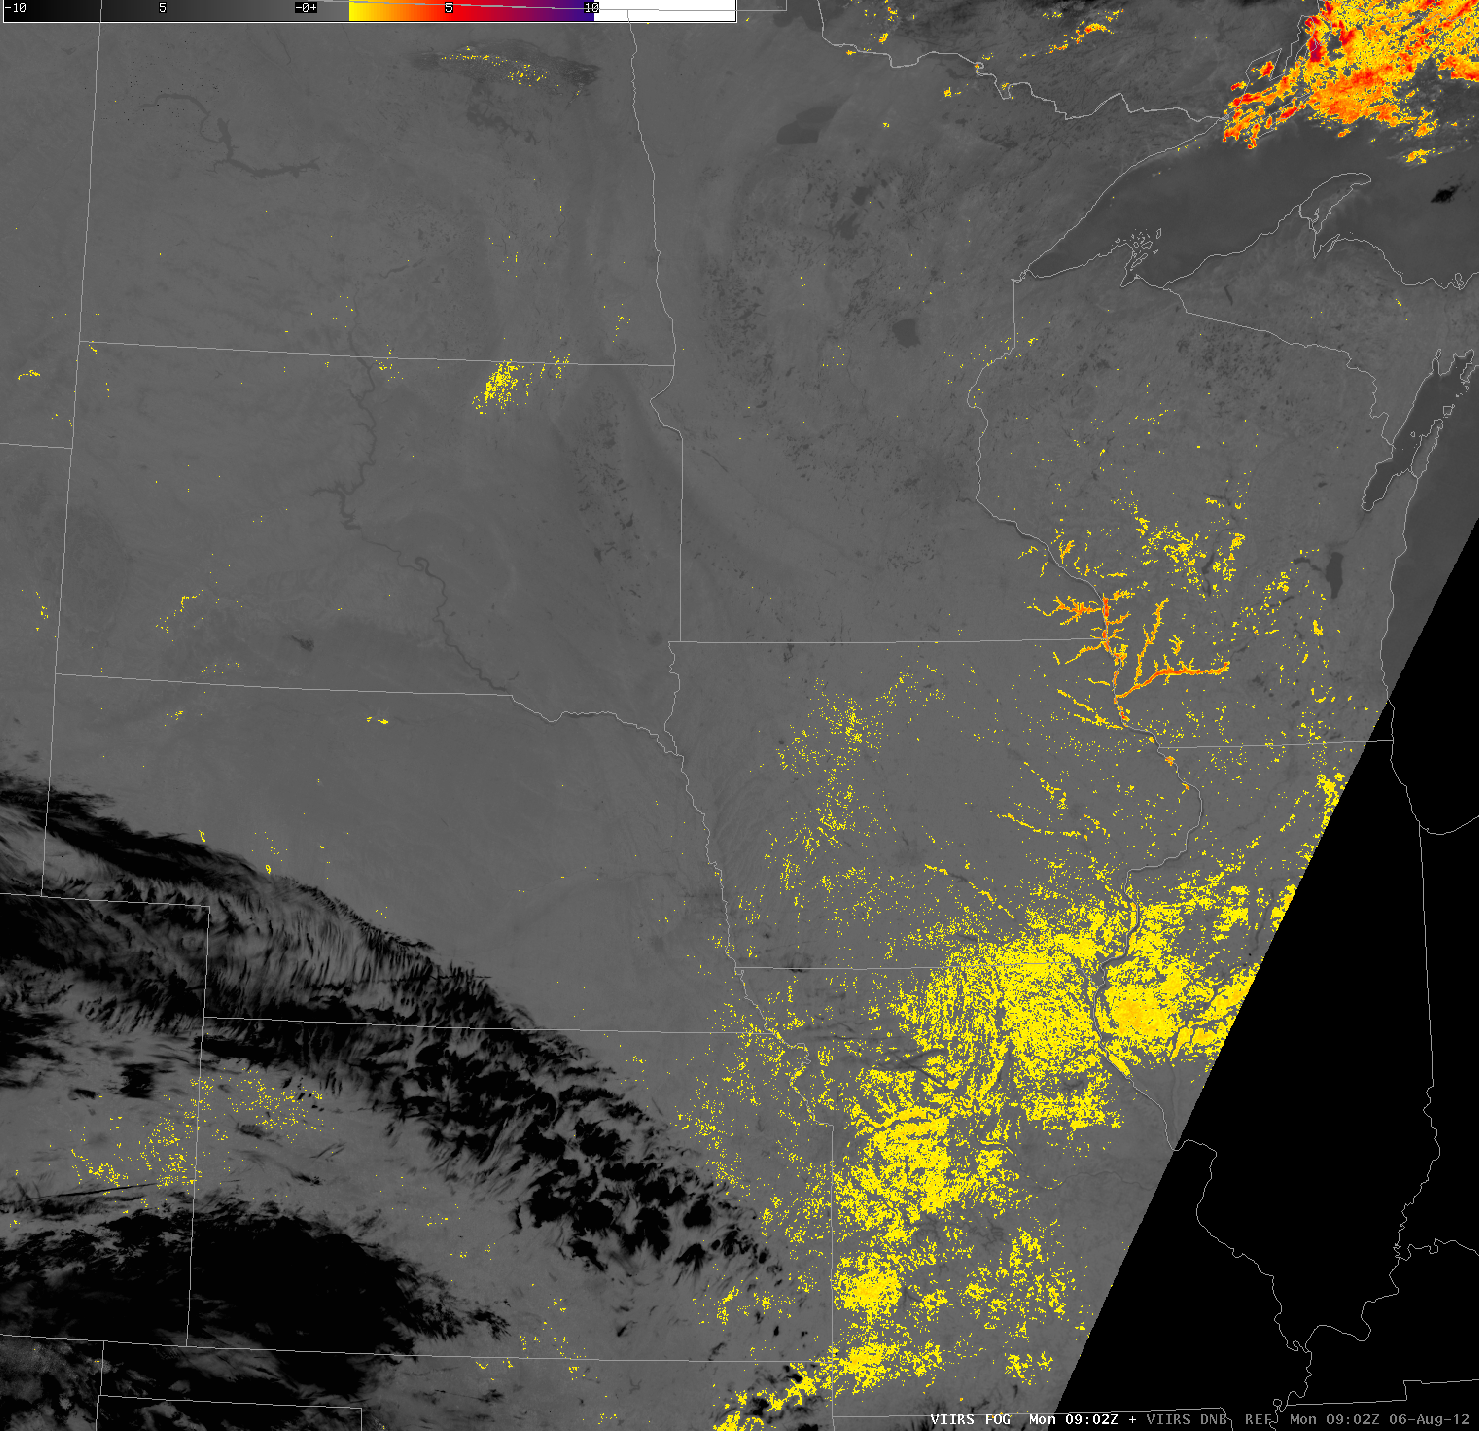 VIIRS Brightness Temperature Difference (between 11.35 and 3.74 Âµm) and DayNight Band (DNB) at 0902 UTC 6 August 2012 (click image to play animation)